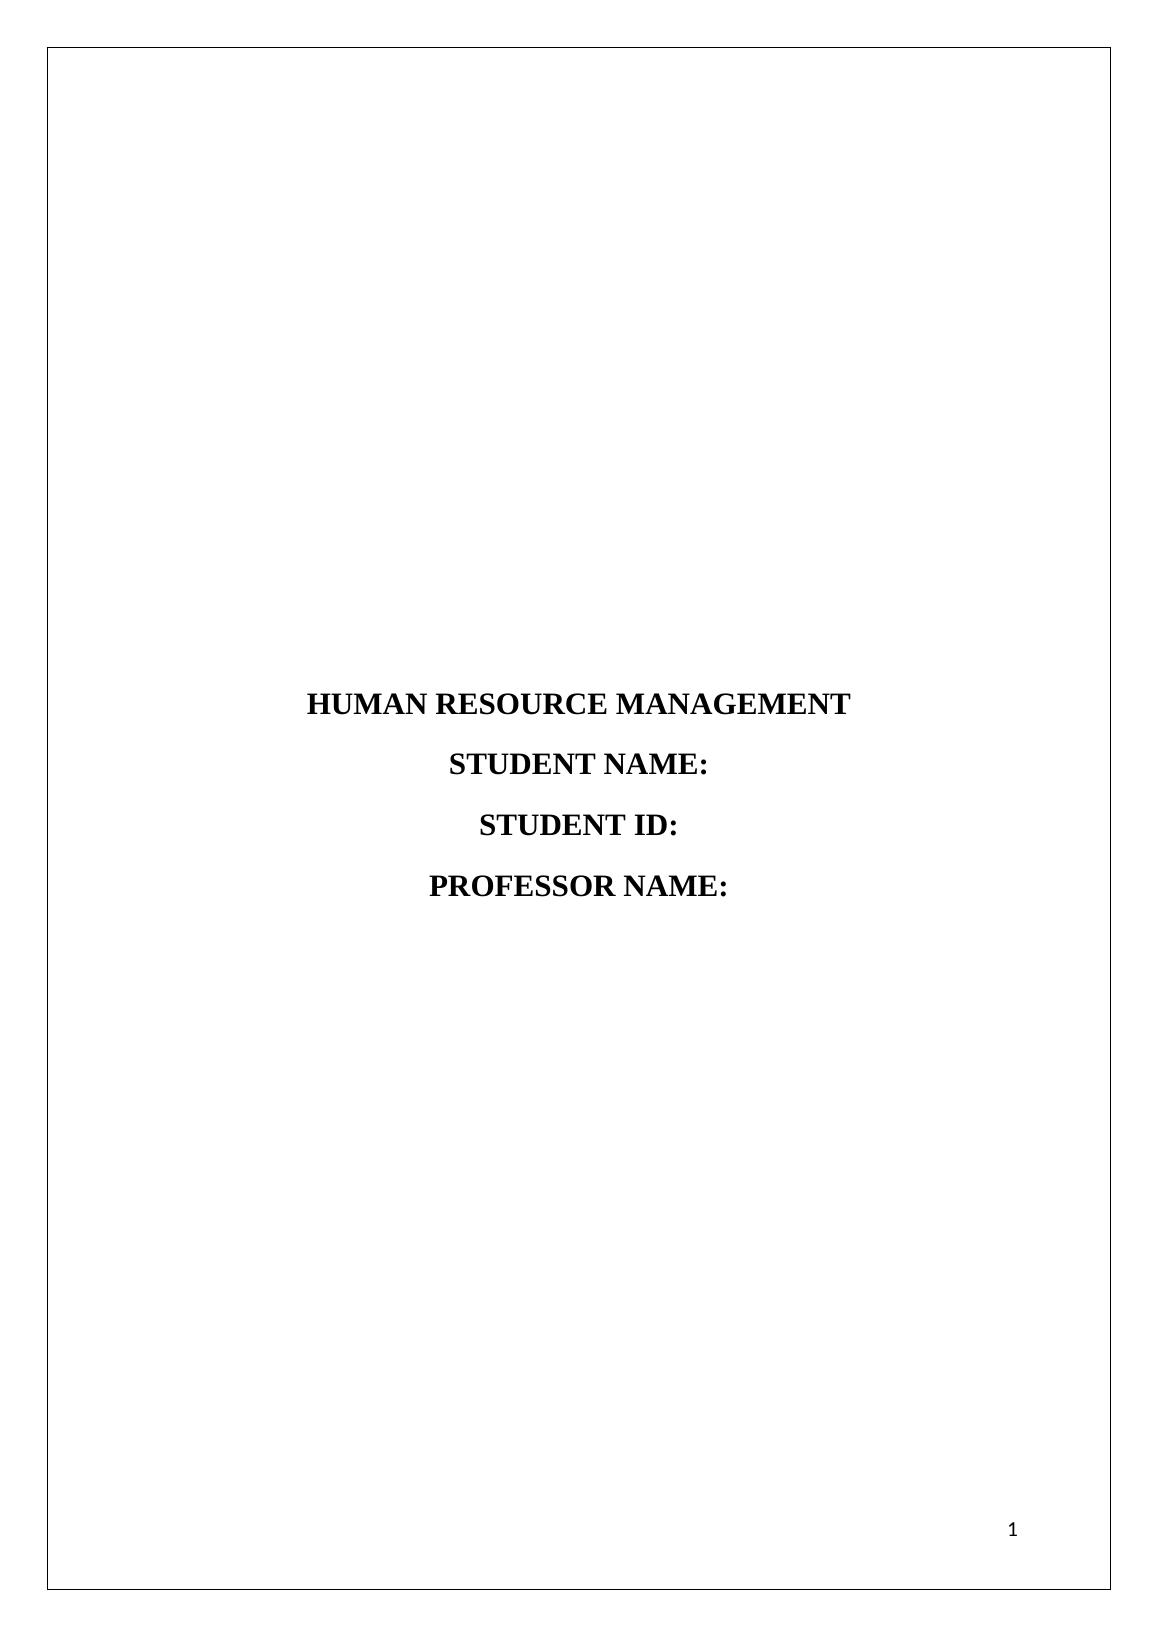 Human Resource Management at Woodhill College_1